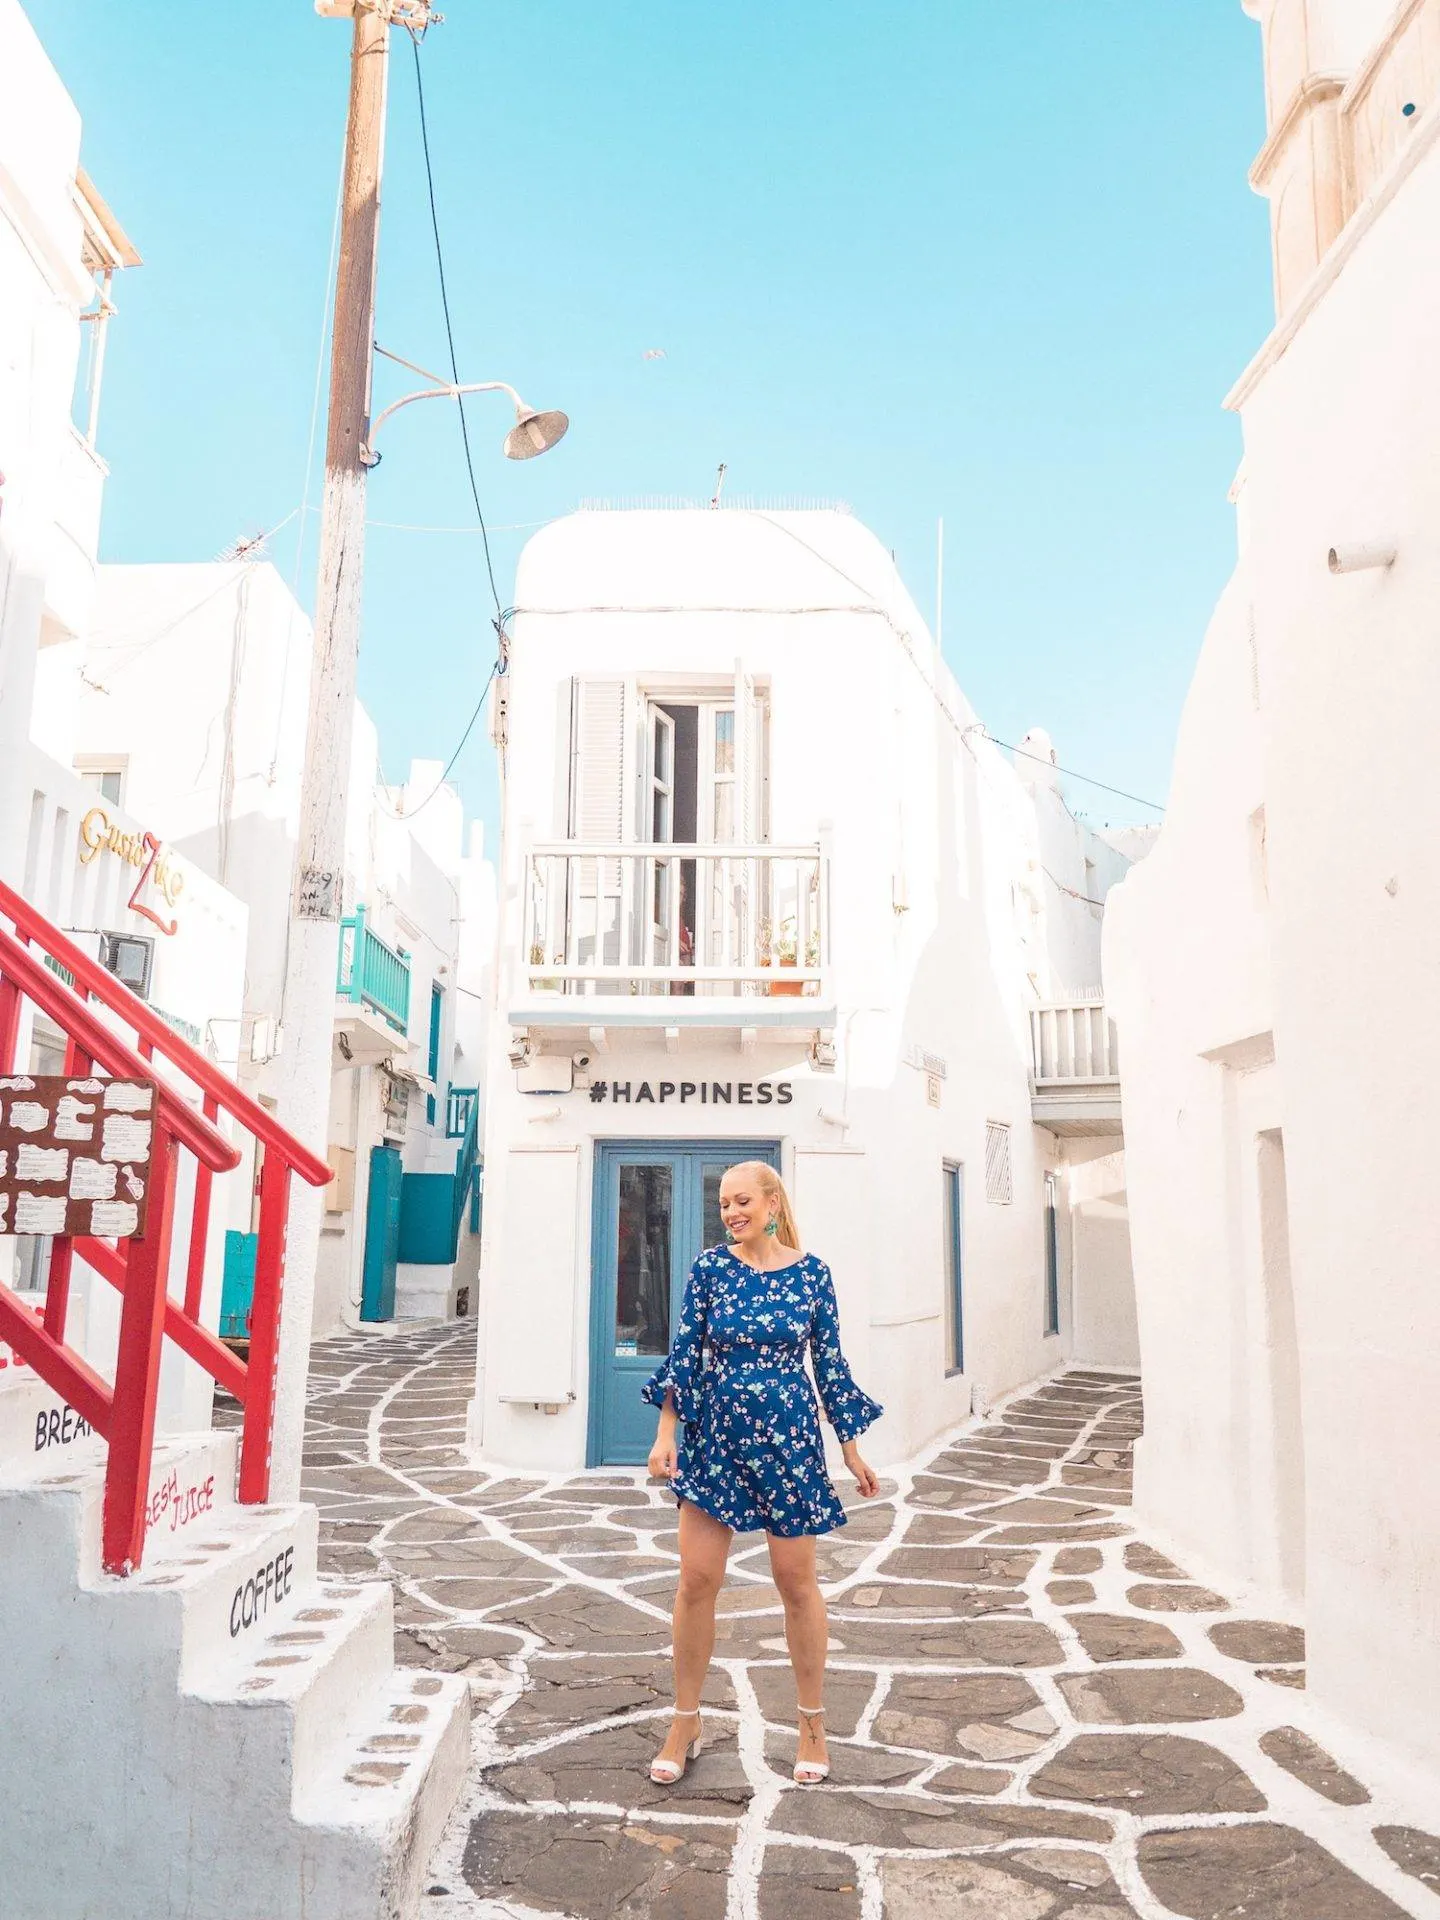 The Happiness store is one of the top instagrammable photo spots in Mykonos. Click the photo to see the rest of my list of the most instagrammable places in Mykonos! 